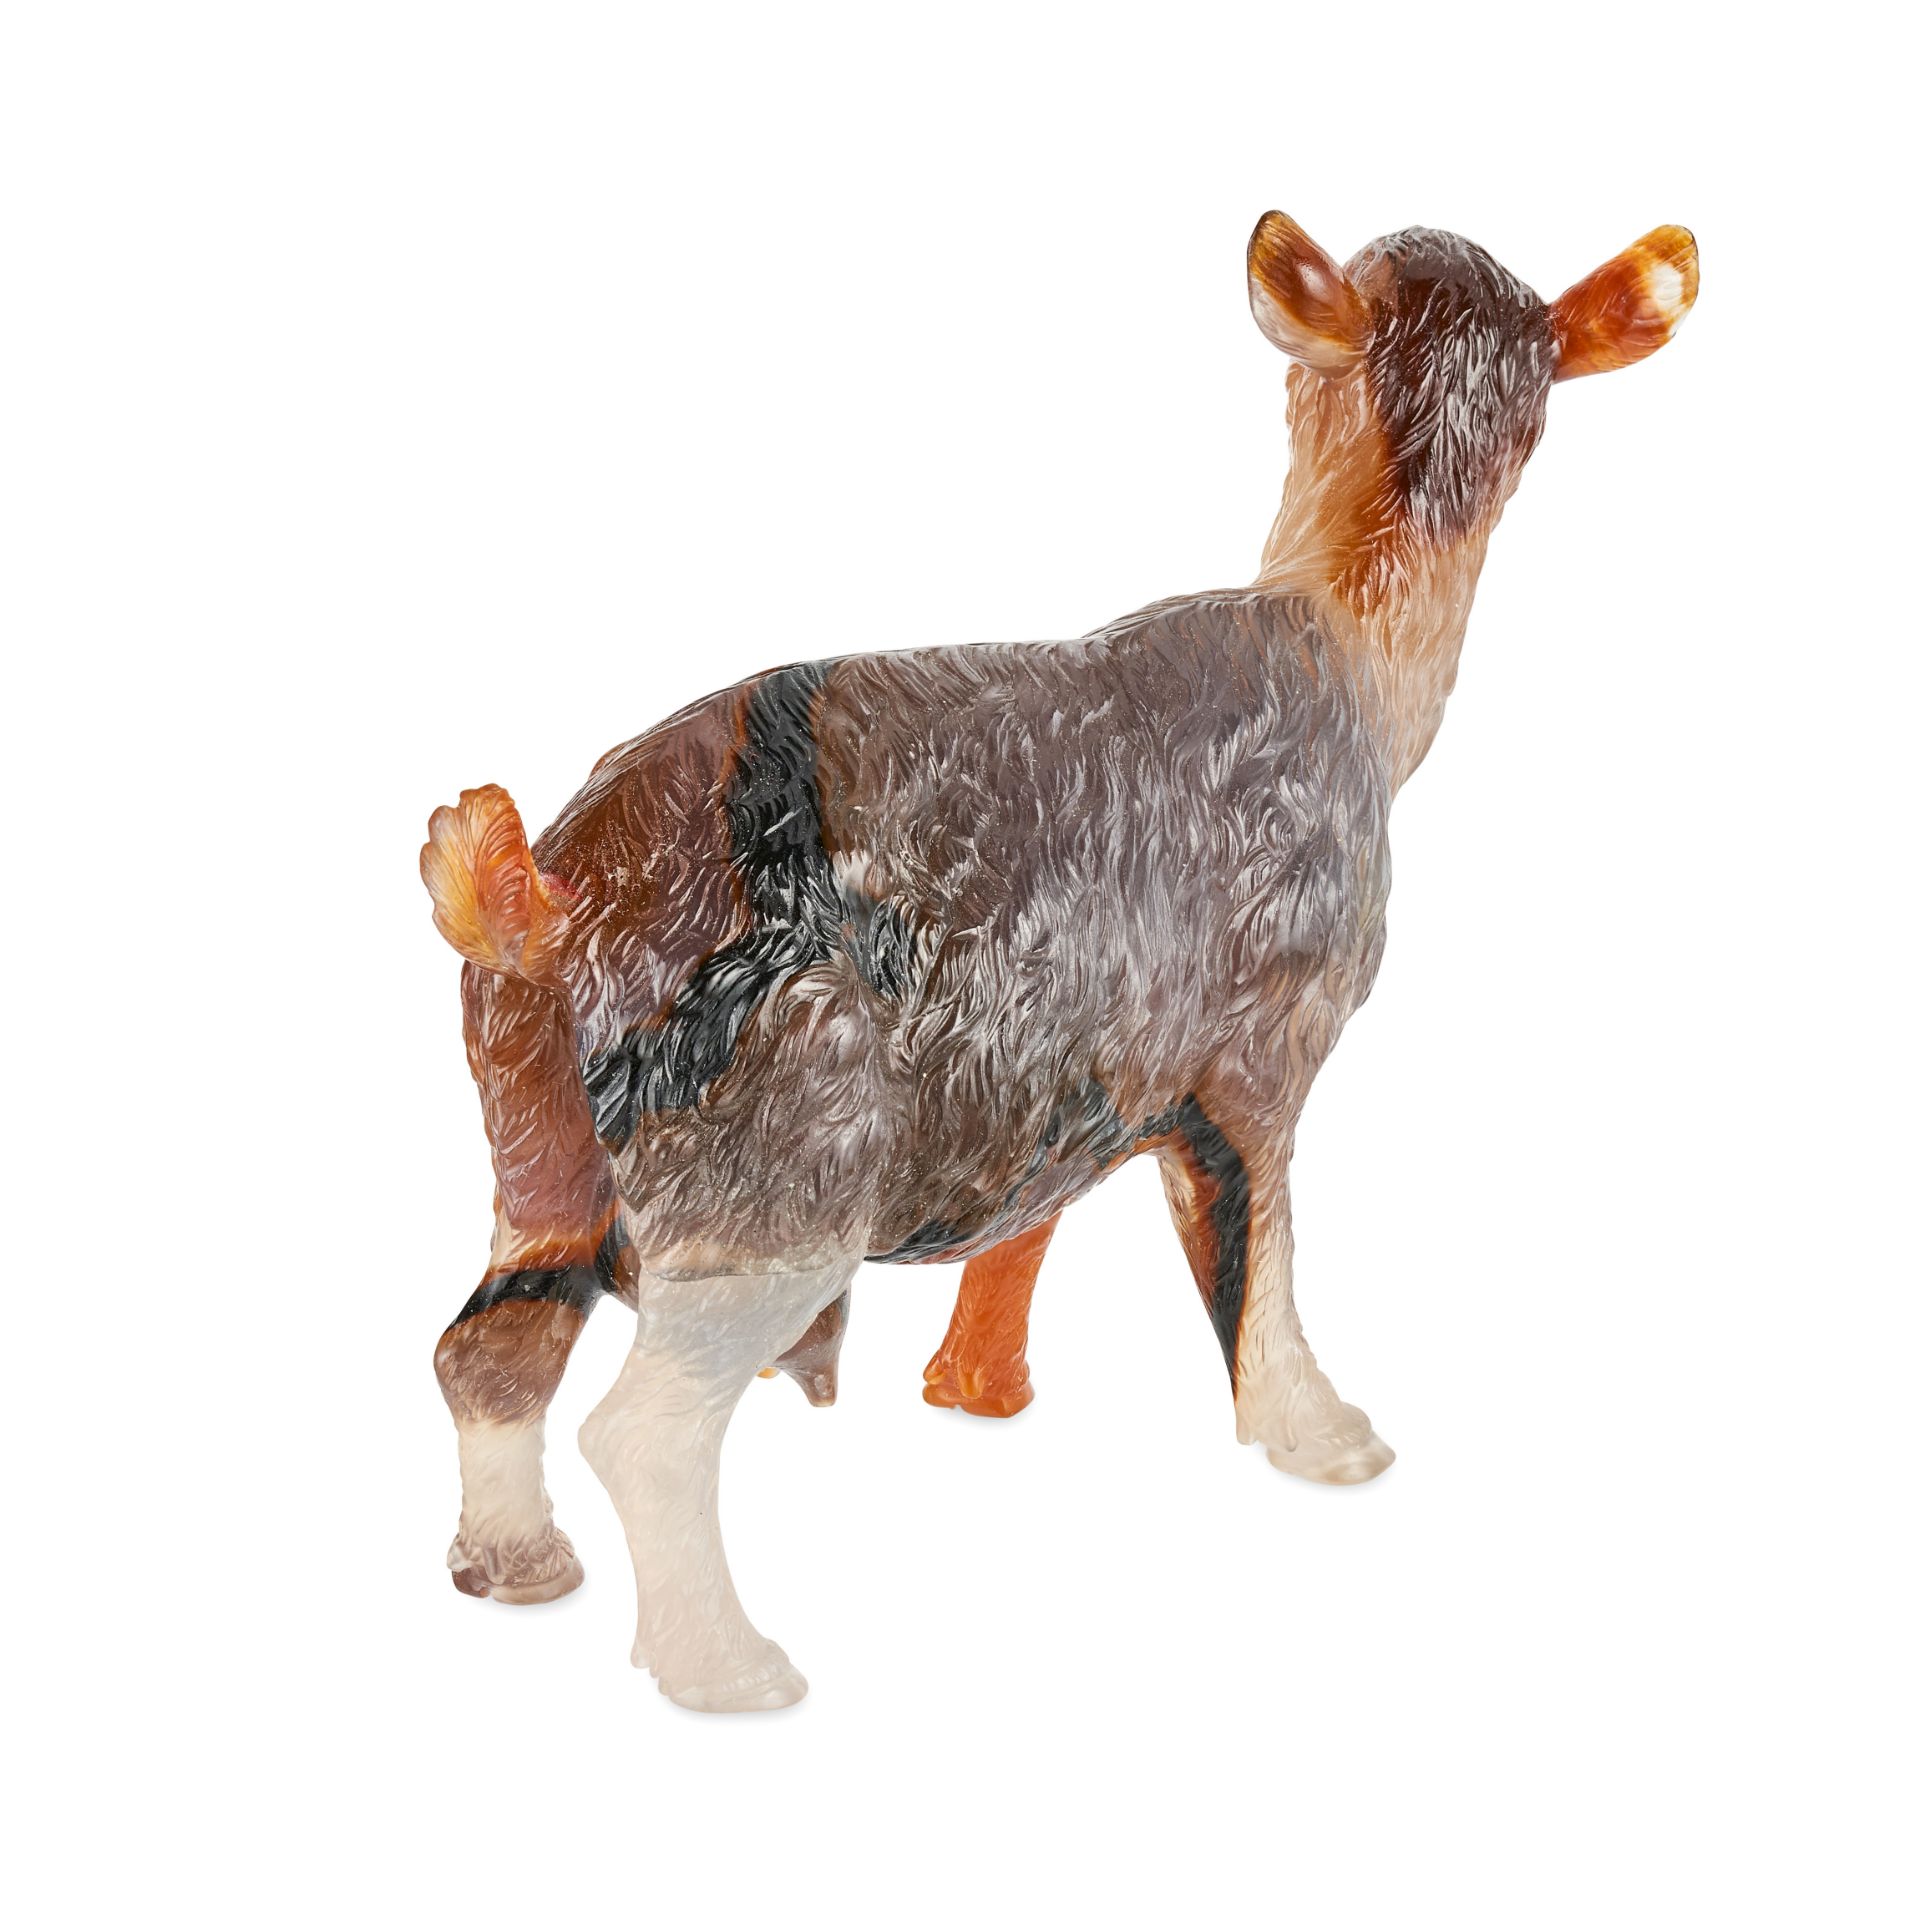 FABERGE, AN EXCEPTIONAL JEWELLED AGATE MODEL OF A SHE GOAT, ST PETERSBURG, CIRCA 1900 - Image 6 of 11